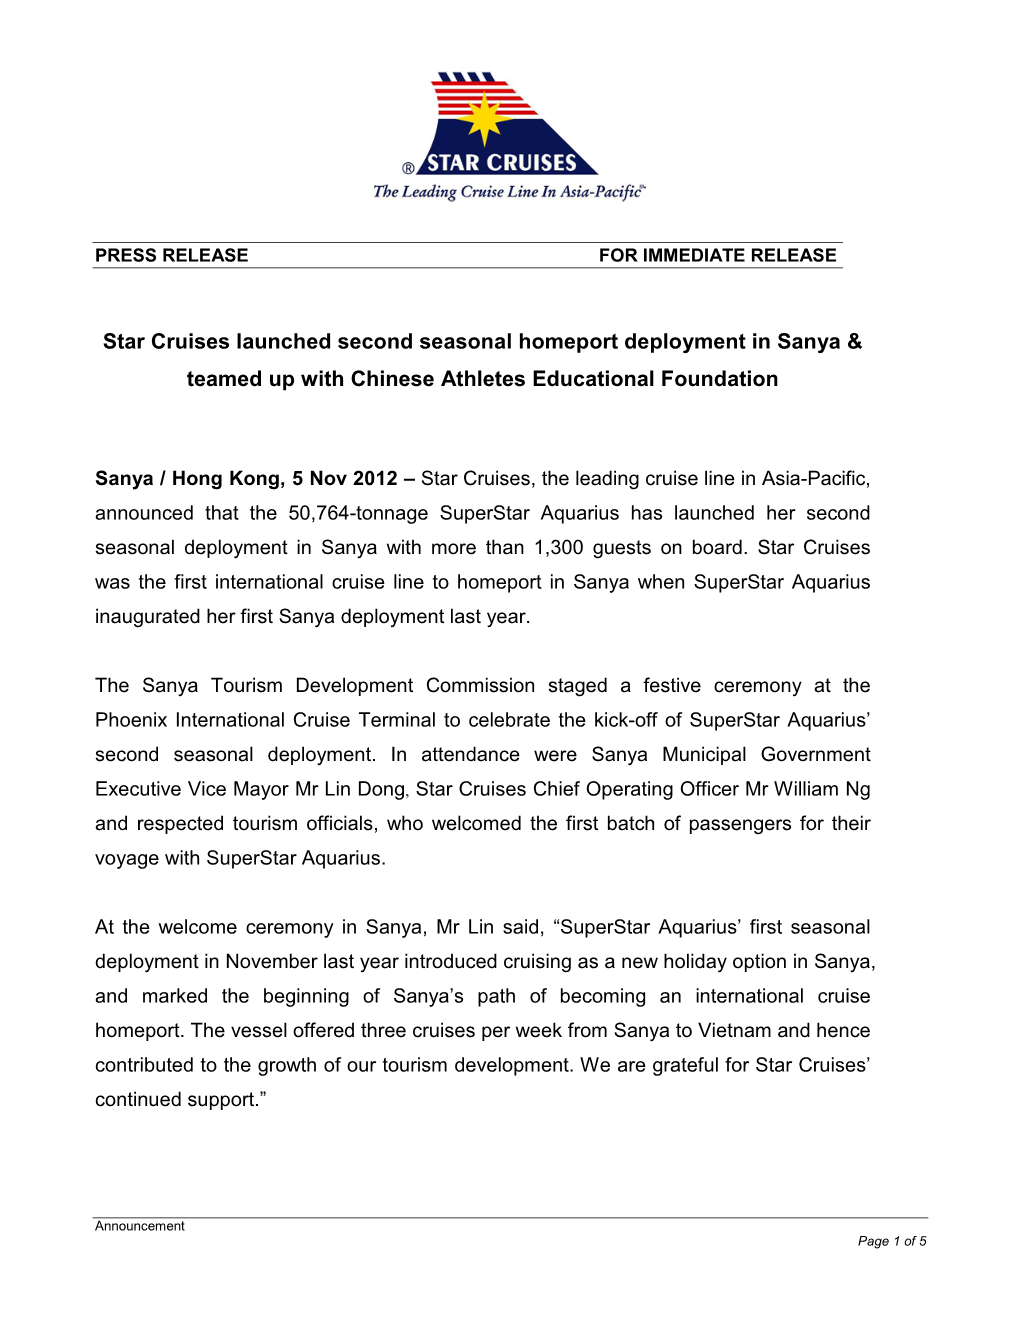 Star Cruises Launched Second Seasonal Homeport Deployment in Sanya & Teamed up with Chinese Athletes Educational Foundation